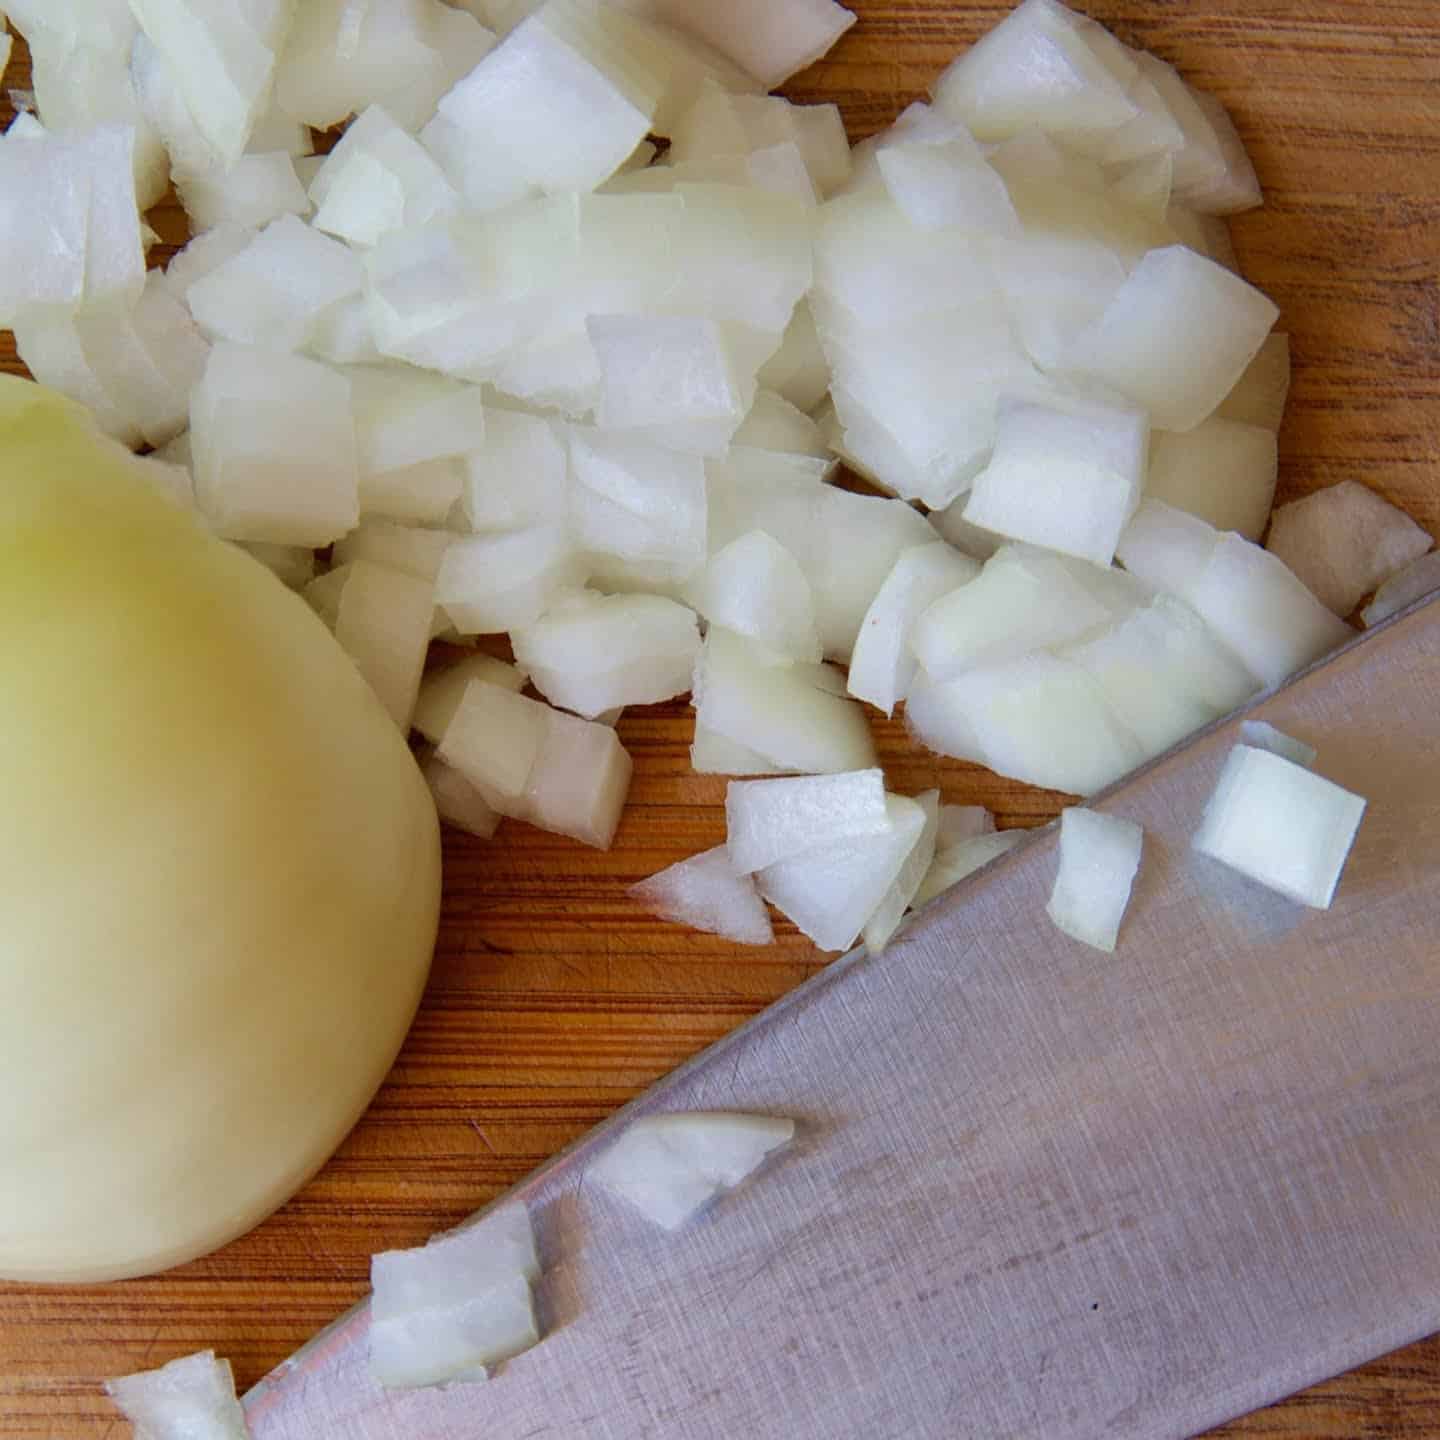 Chopping an onion finely